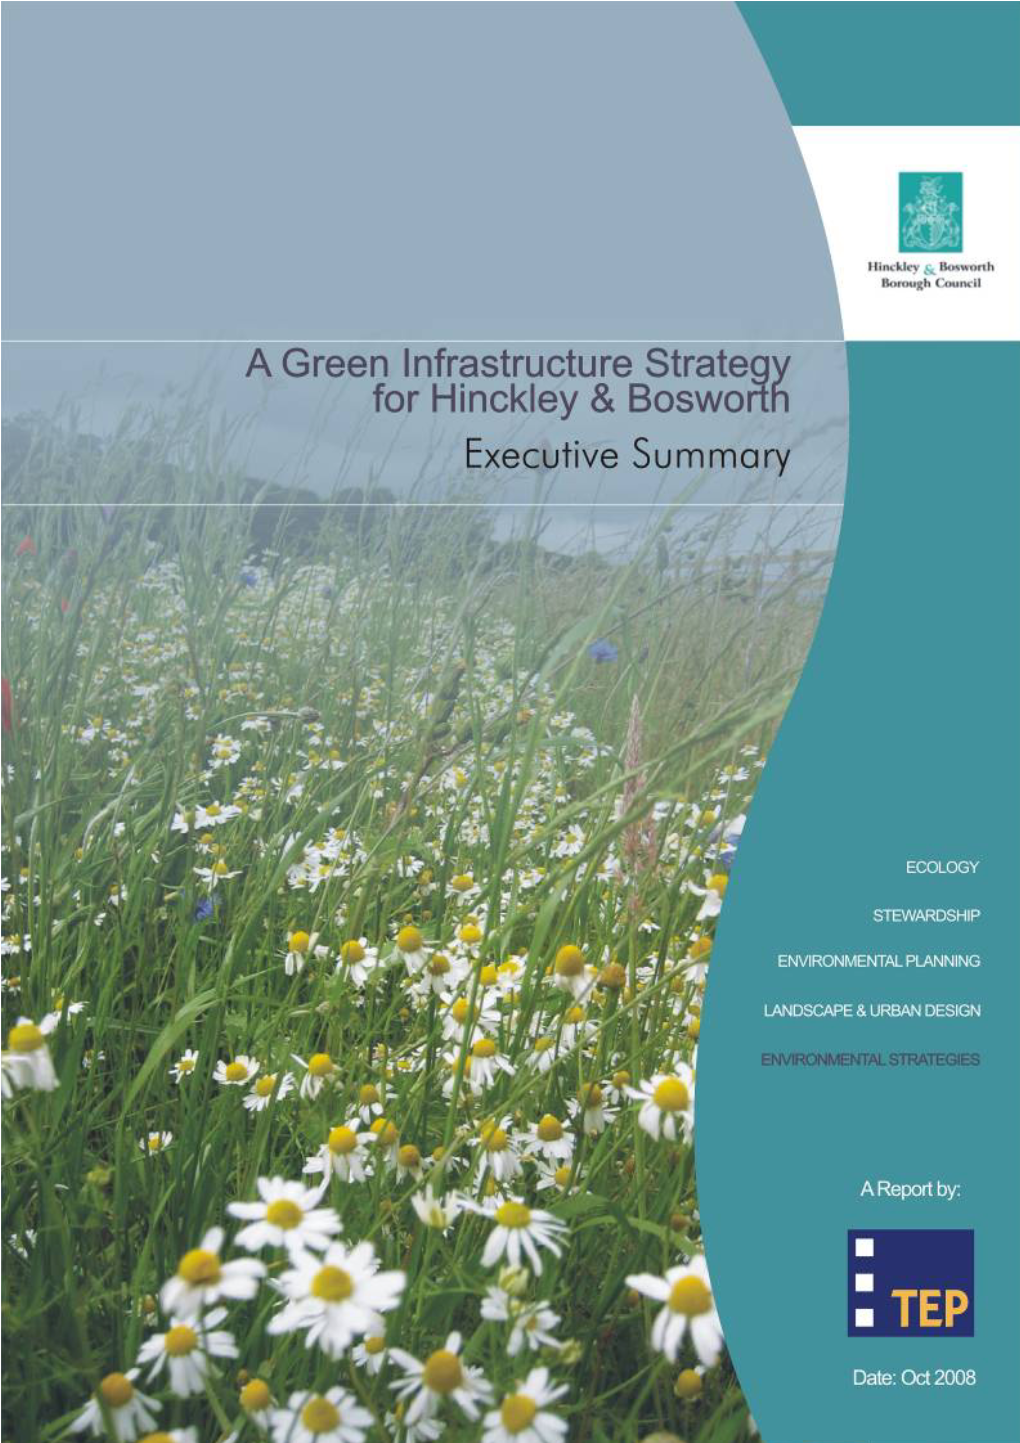 A Green Infrastructure Strategy for Hinckley & Bosworth